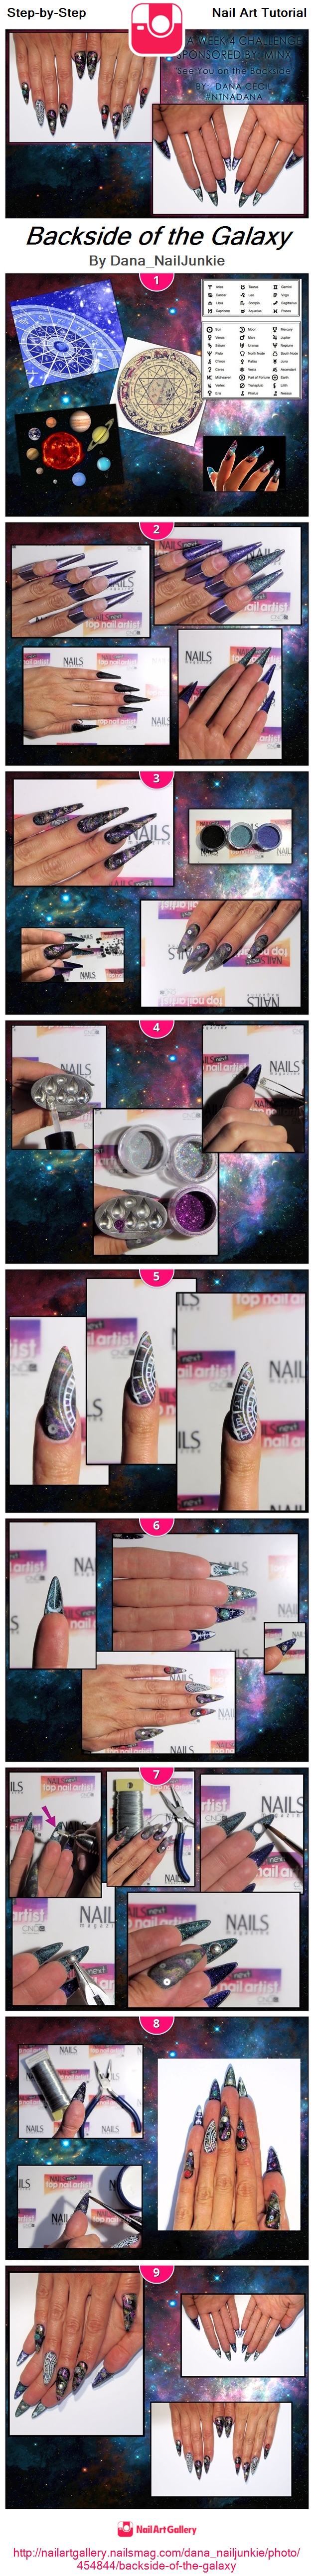 Backside of the Galaxy - Nail Art Gallery